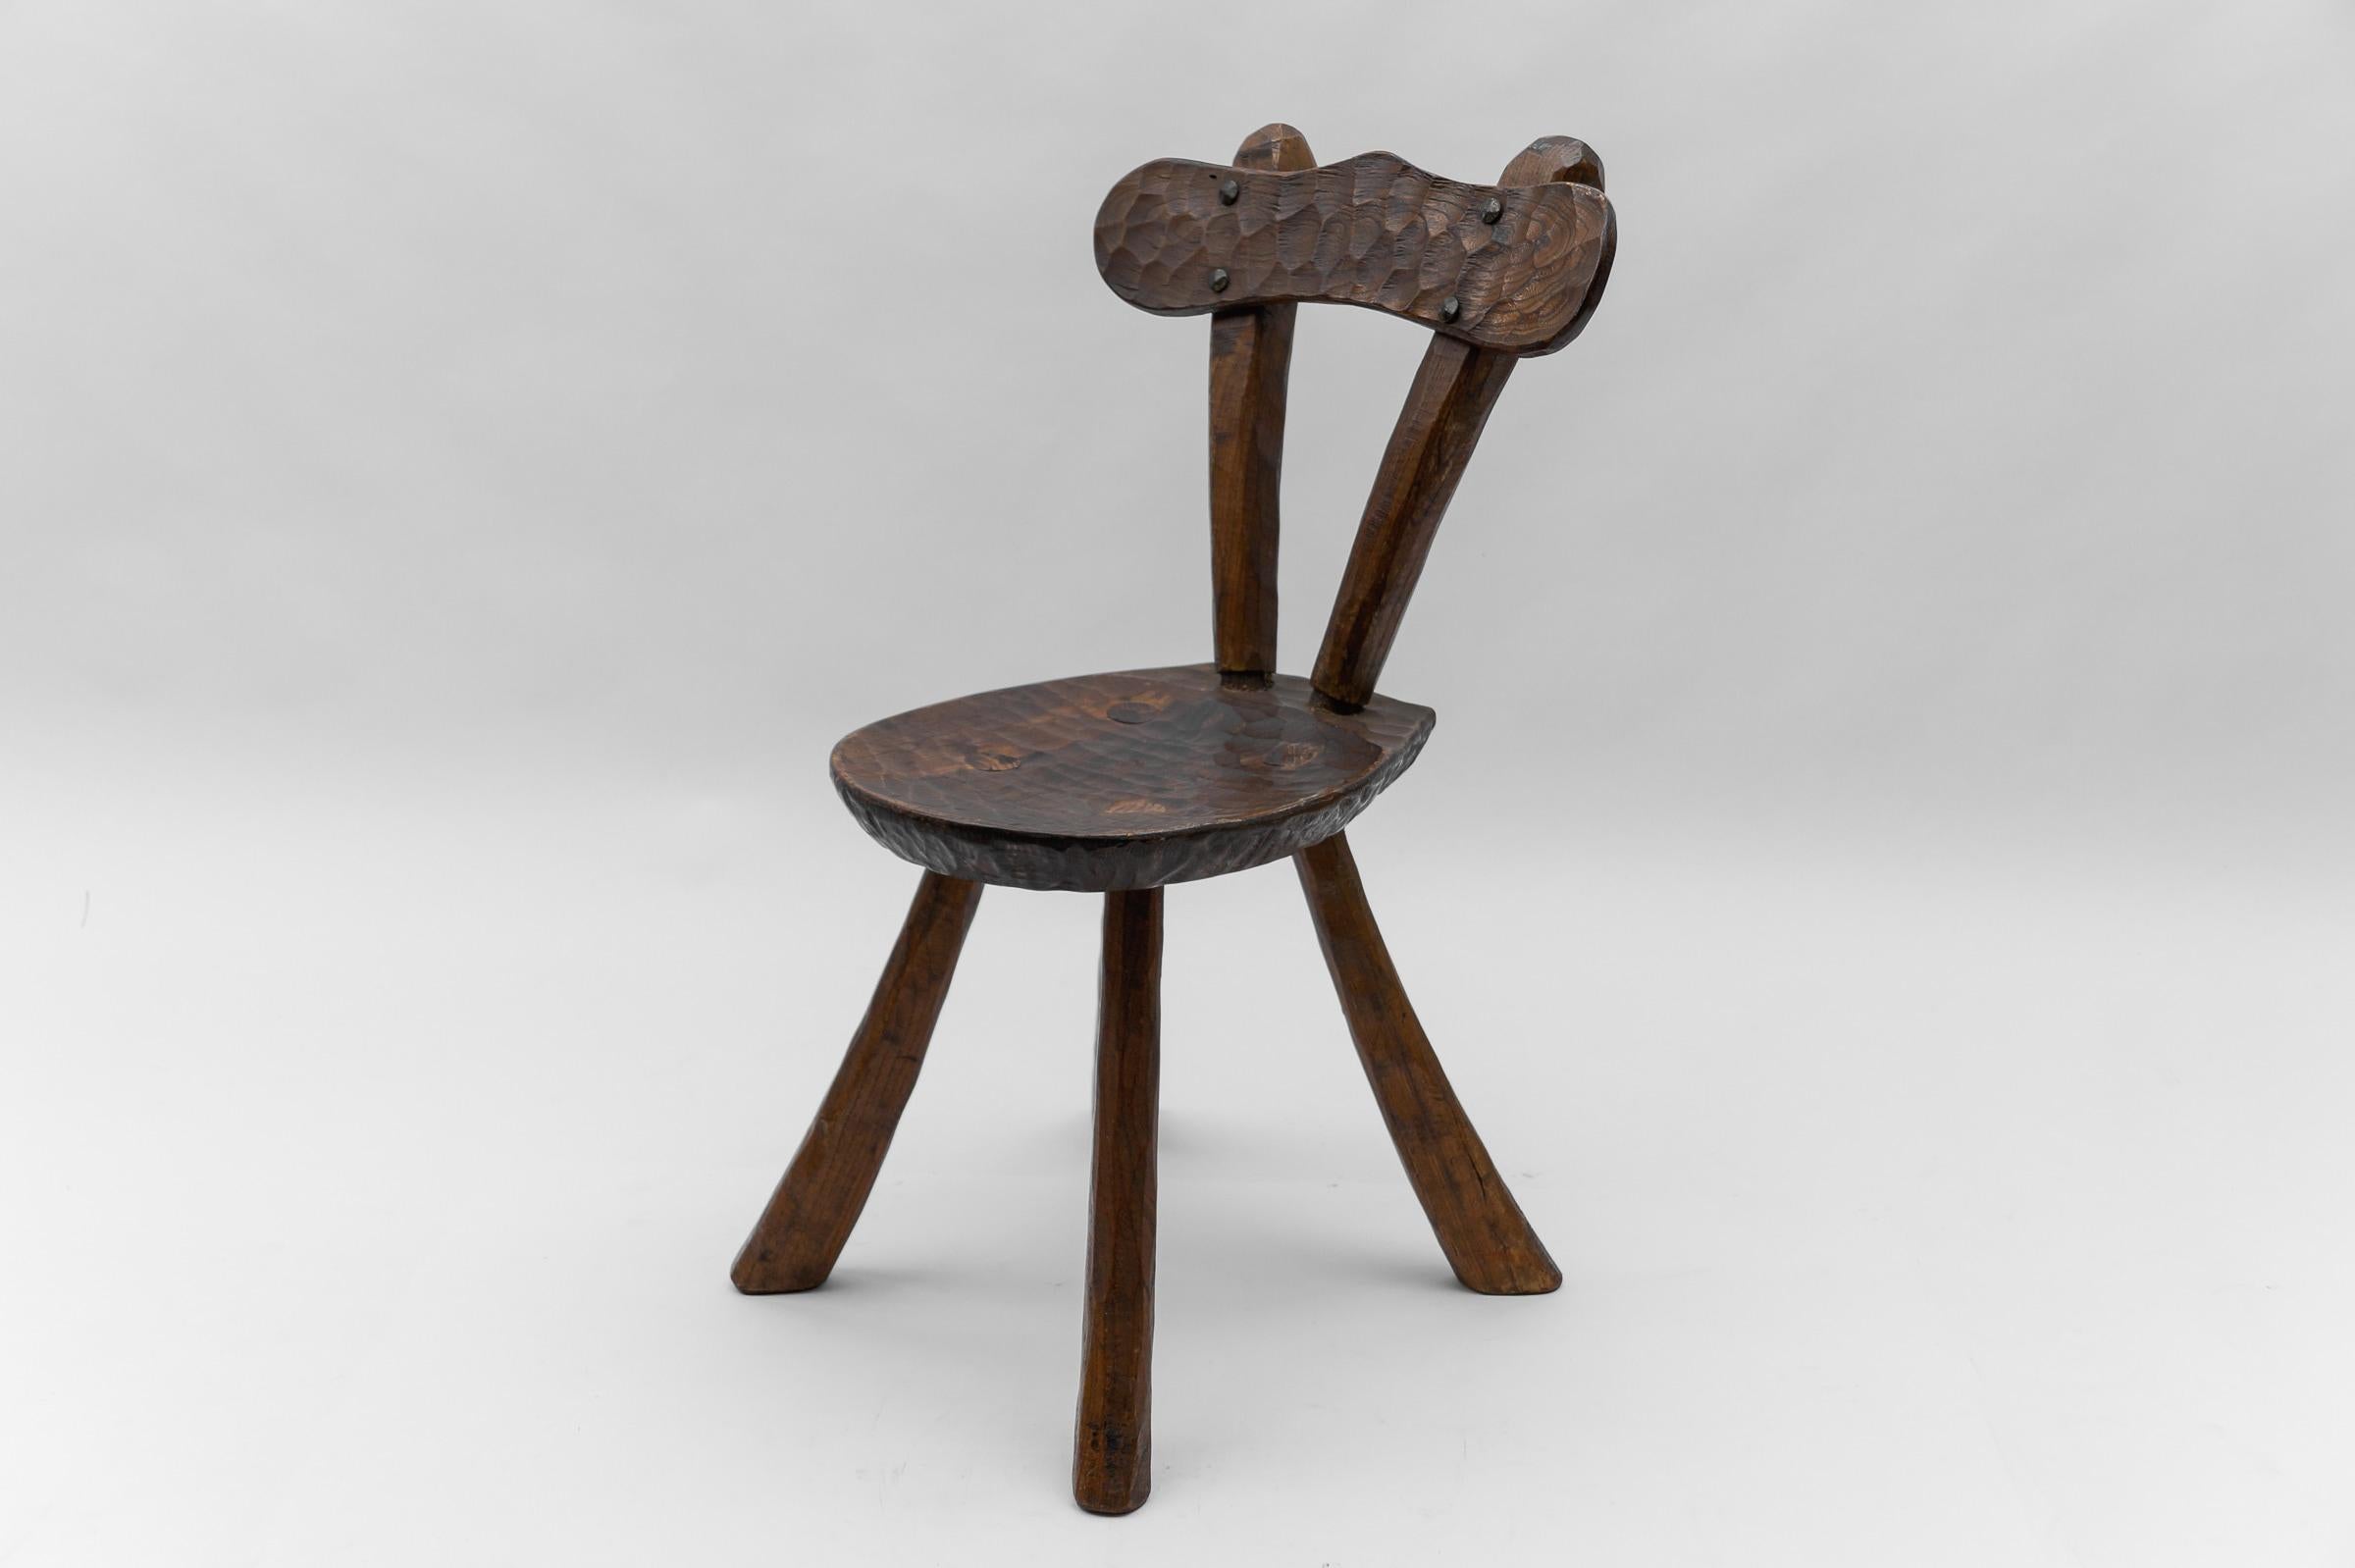 Rustic French Provincial Sculptured Chair in the Style of Alexandre Noll, 1960s

The seat width is 32 cm, the seat depth 35 cm and the seat height 38 cm. 
The overall width is 42cm, the overall depth is 49cm and the overall height is 75cm.

We have